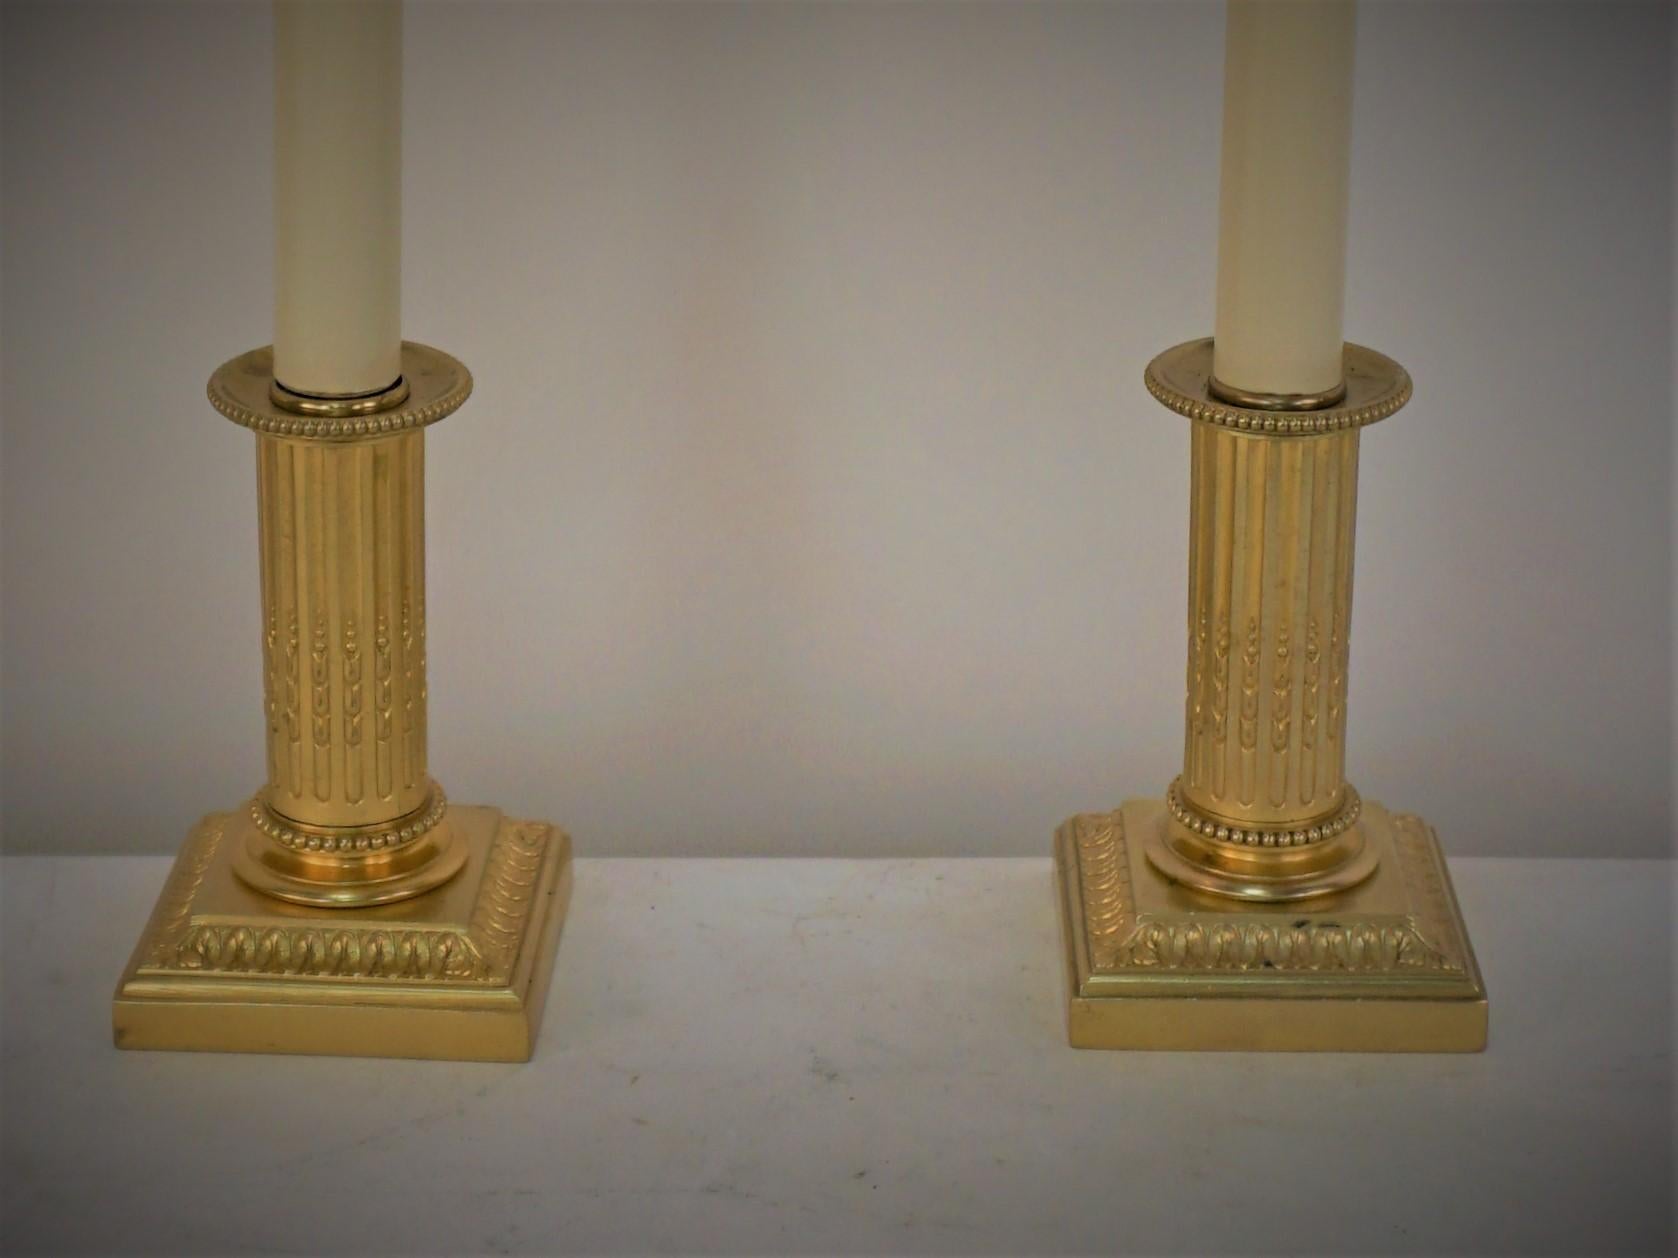 Pair of classic design bronze candlestick that have been electrified as table lamps. 
Measurement includes the lampshade.